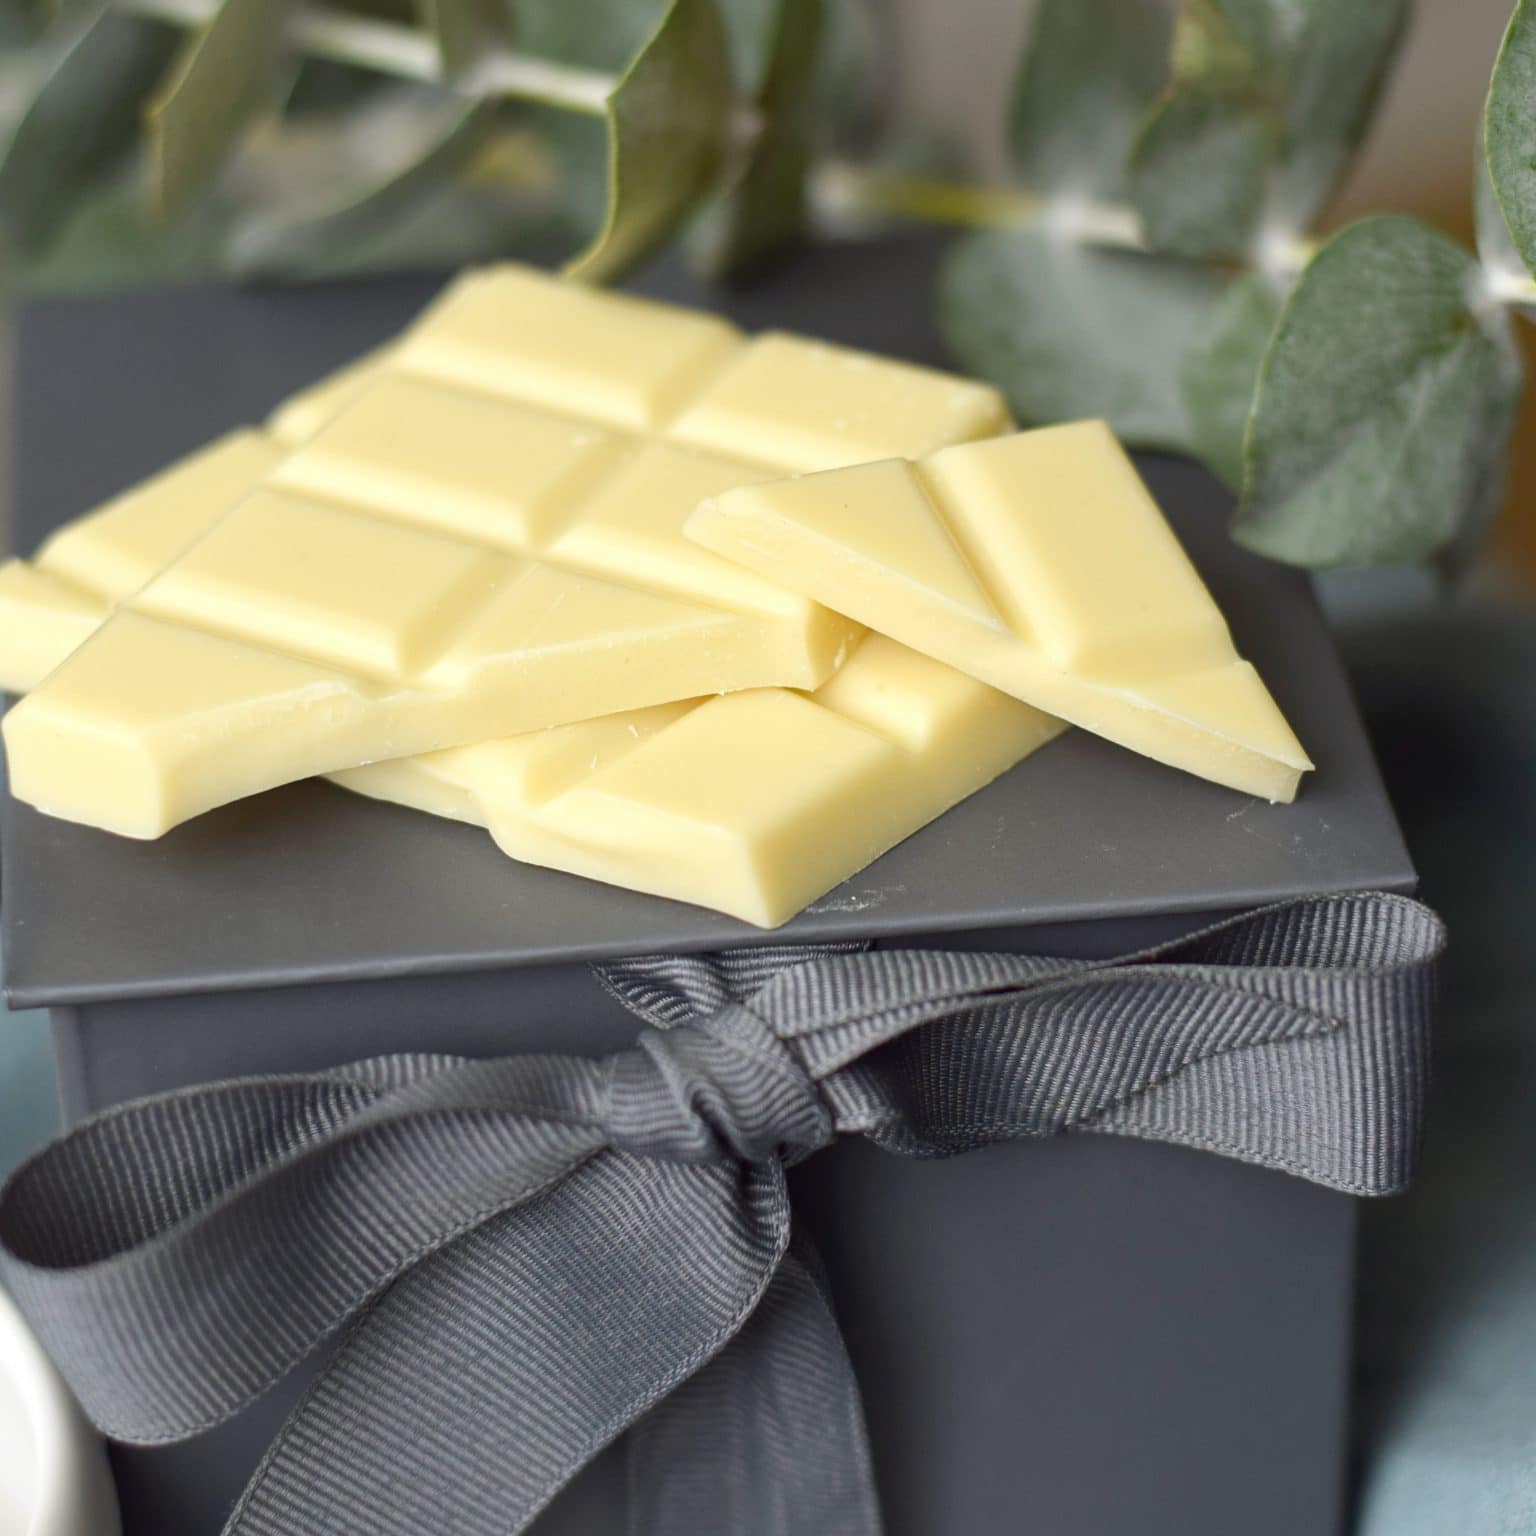 Stack of 3 pieces of an artisan chocolate bar sitting on gray gift box with a bow; bar is made with gourmet white chocolate